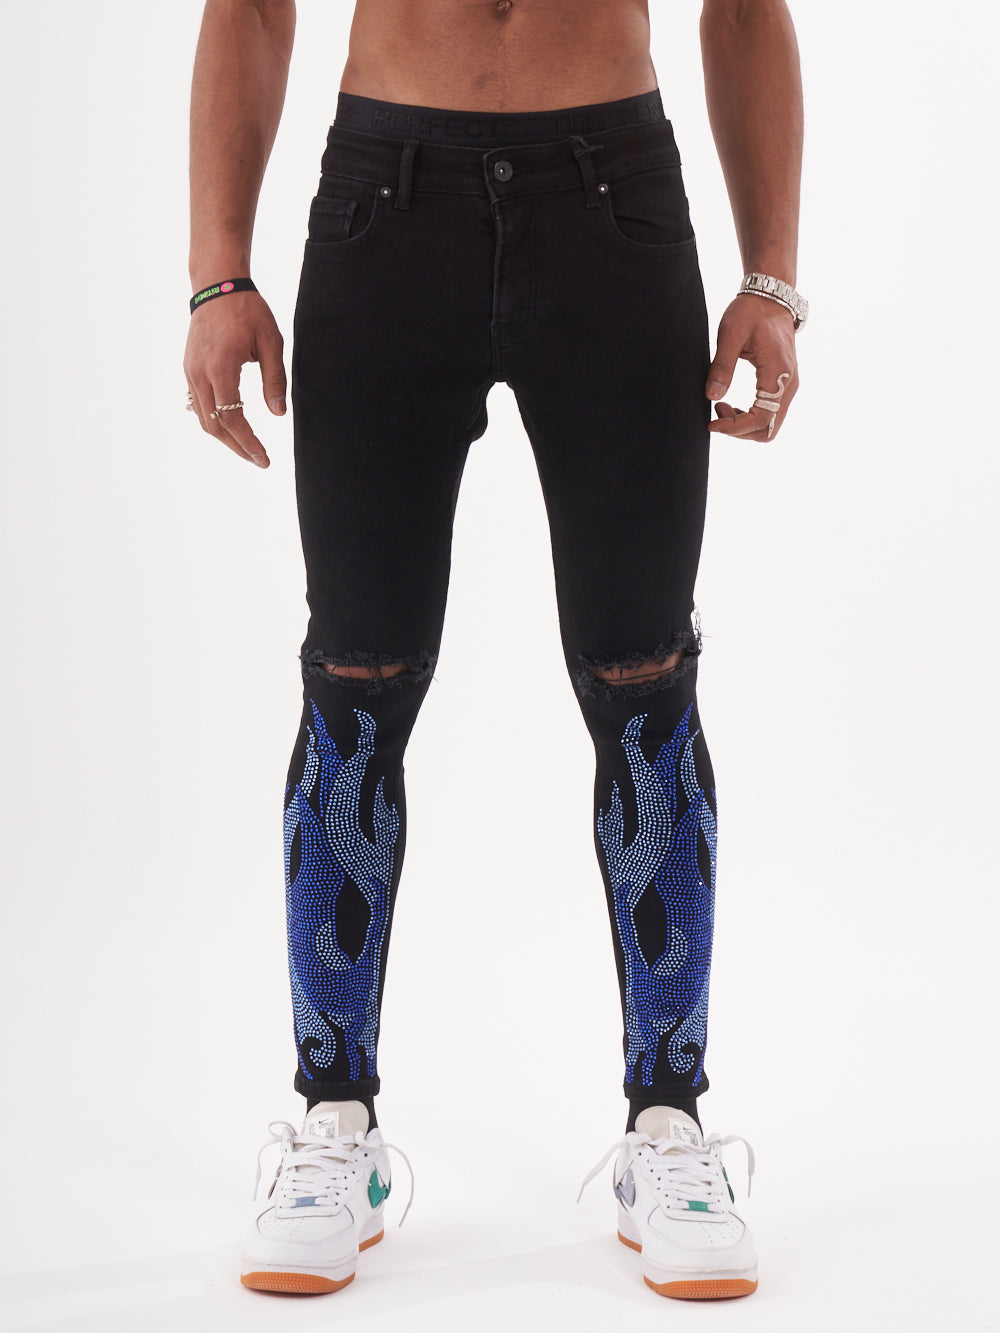 A man wearing black jeans with HELLFIRE | BLUE flames on them.